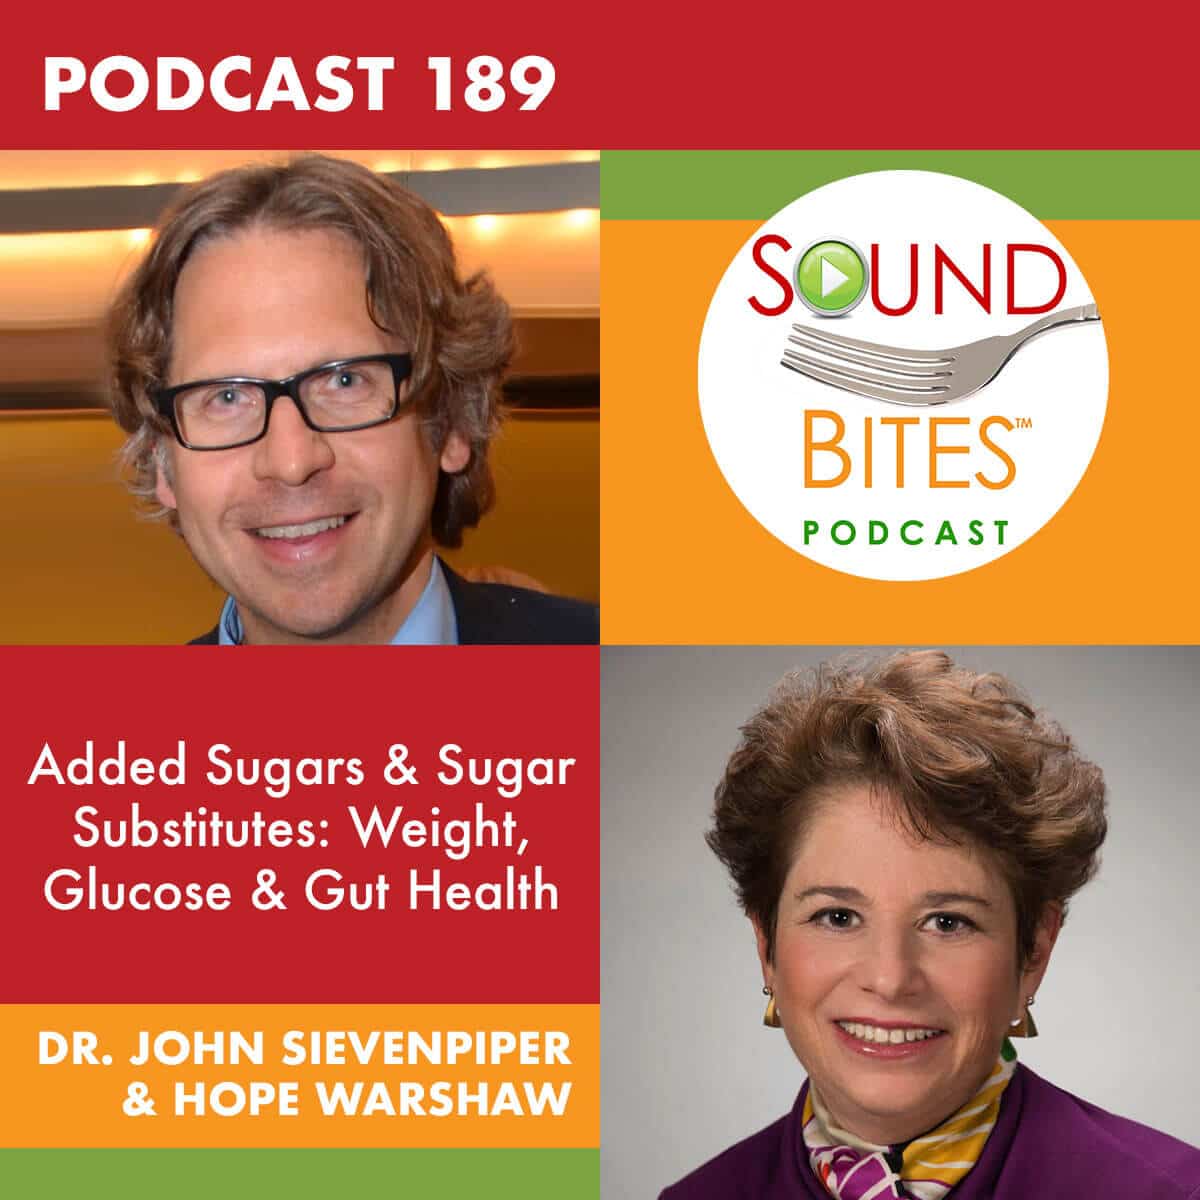 Podcast Epaisode 189: Added Sugars & Sugar Substitutes: Weight, Glucose & Gut Health – Dr. John Sievenpiper & Hope Warshaw